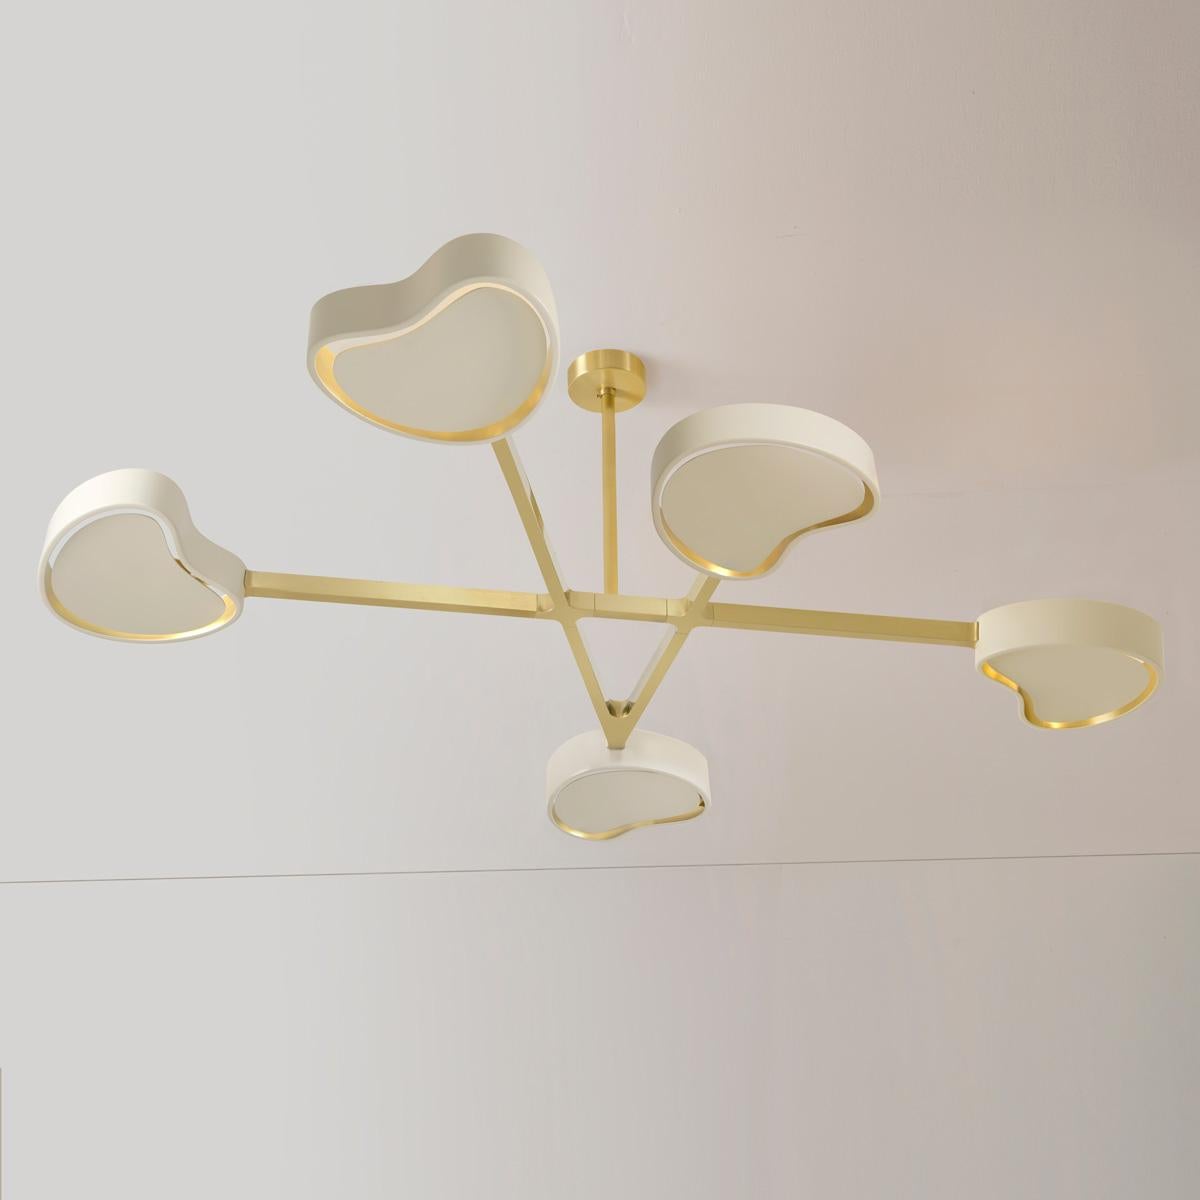 Cuore N.5 Ceiling Light by Gaspare Asaro. Peltro and Bronze Finish For Sale 1